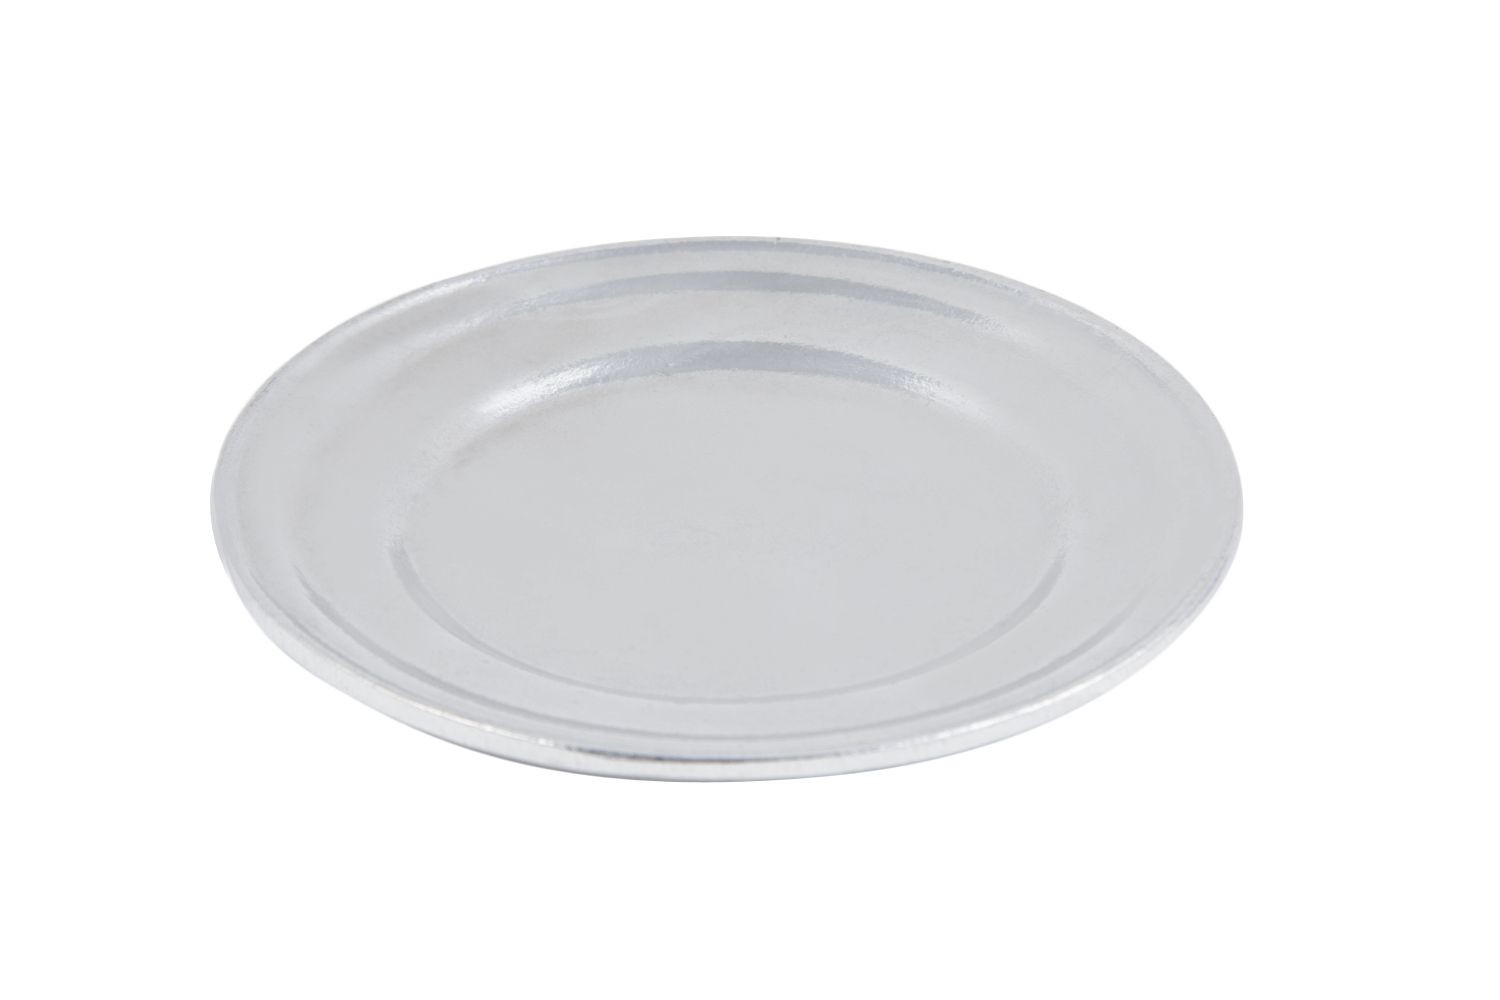 Bon Chef 1001P Traditional Bread and Butter Plate, Pewter Glo 6" Dia., Set of 12